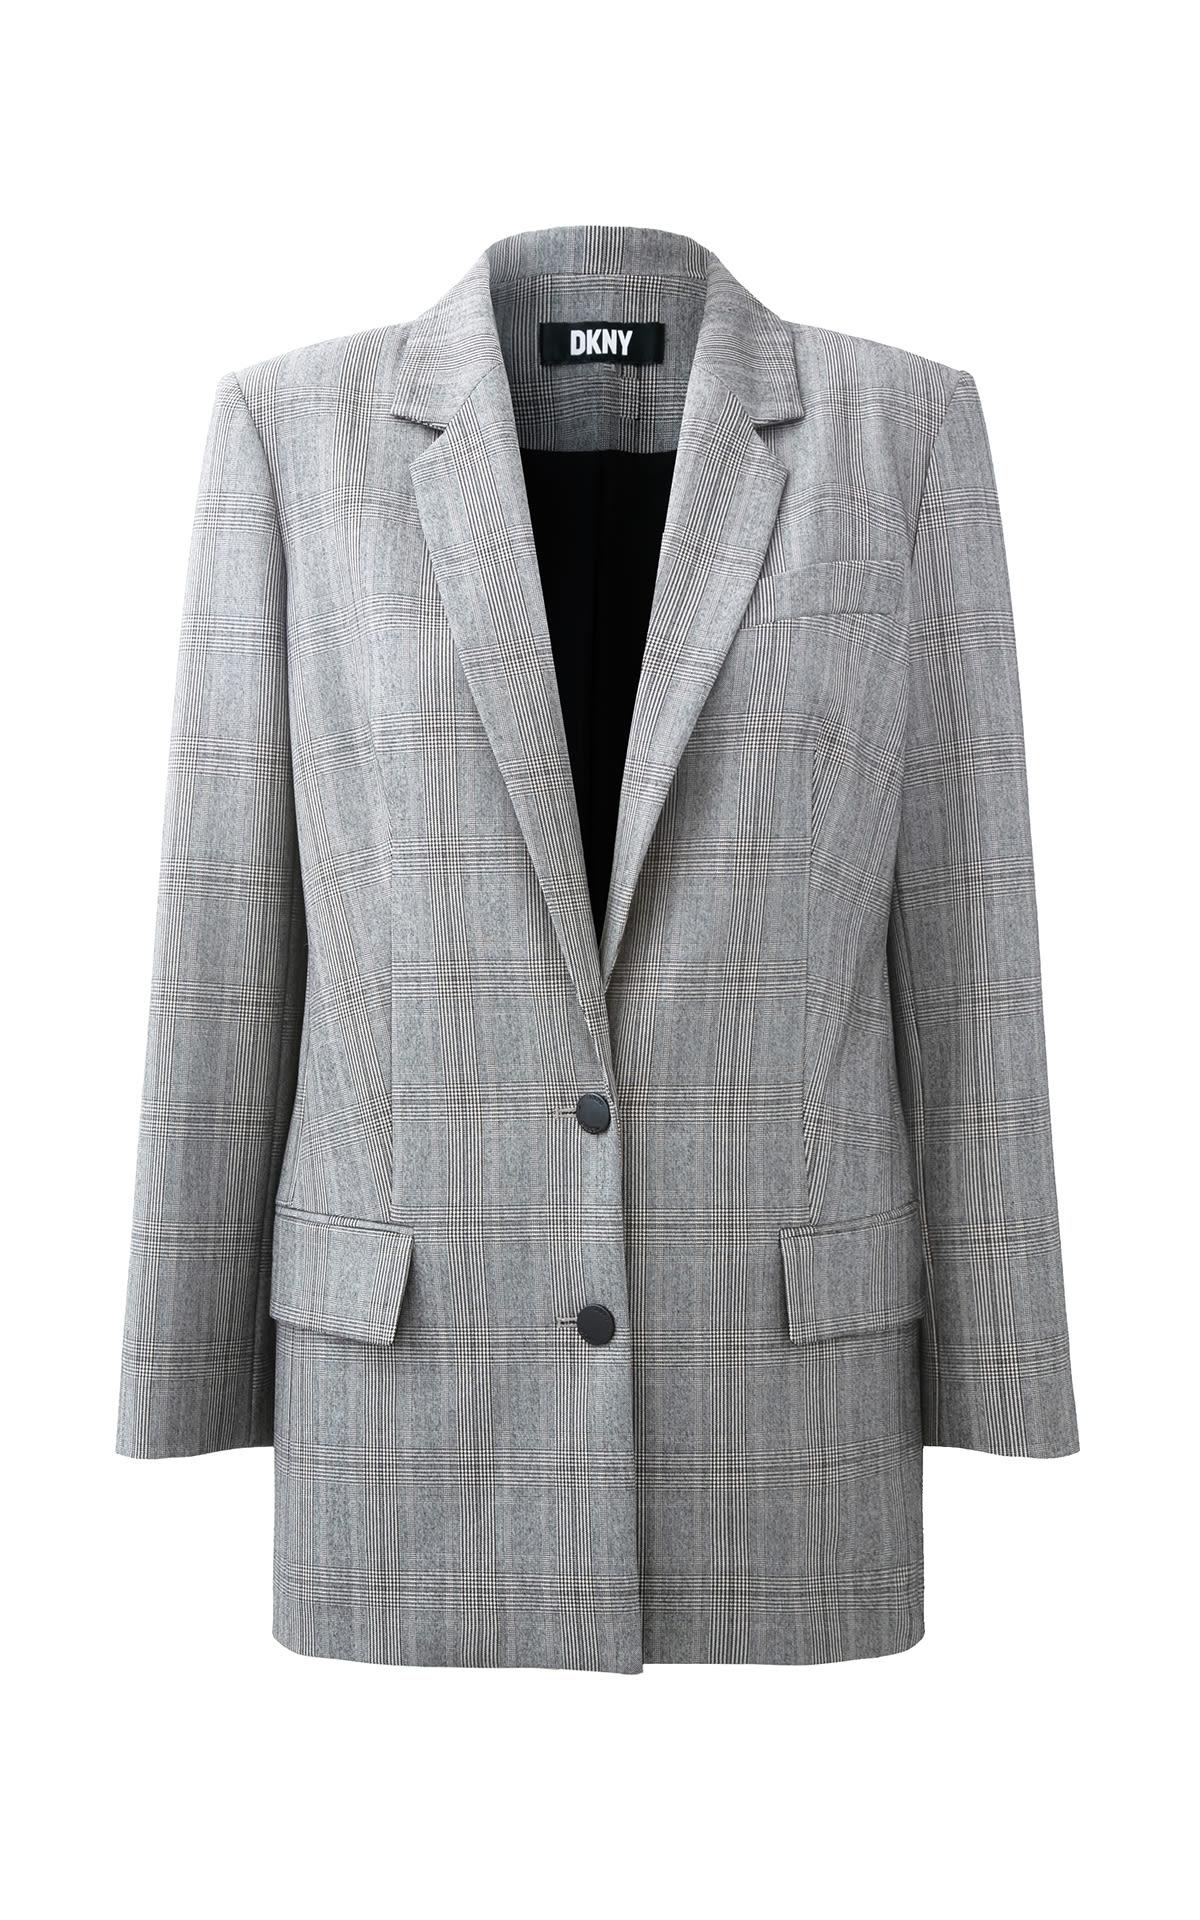 DKNY Long sleeve two-button plaid blazer from Bicester Village